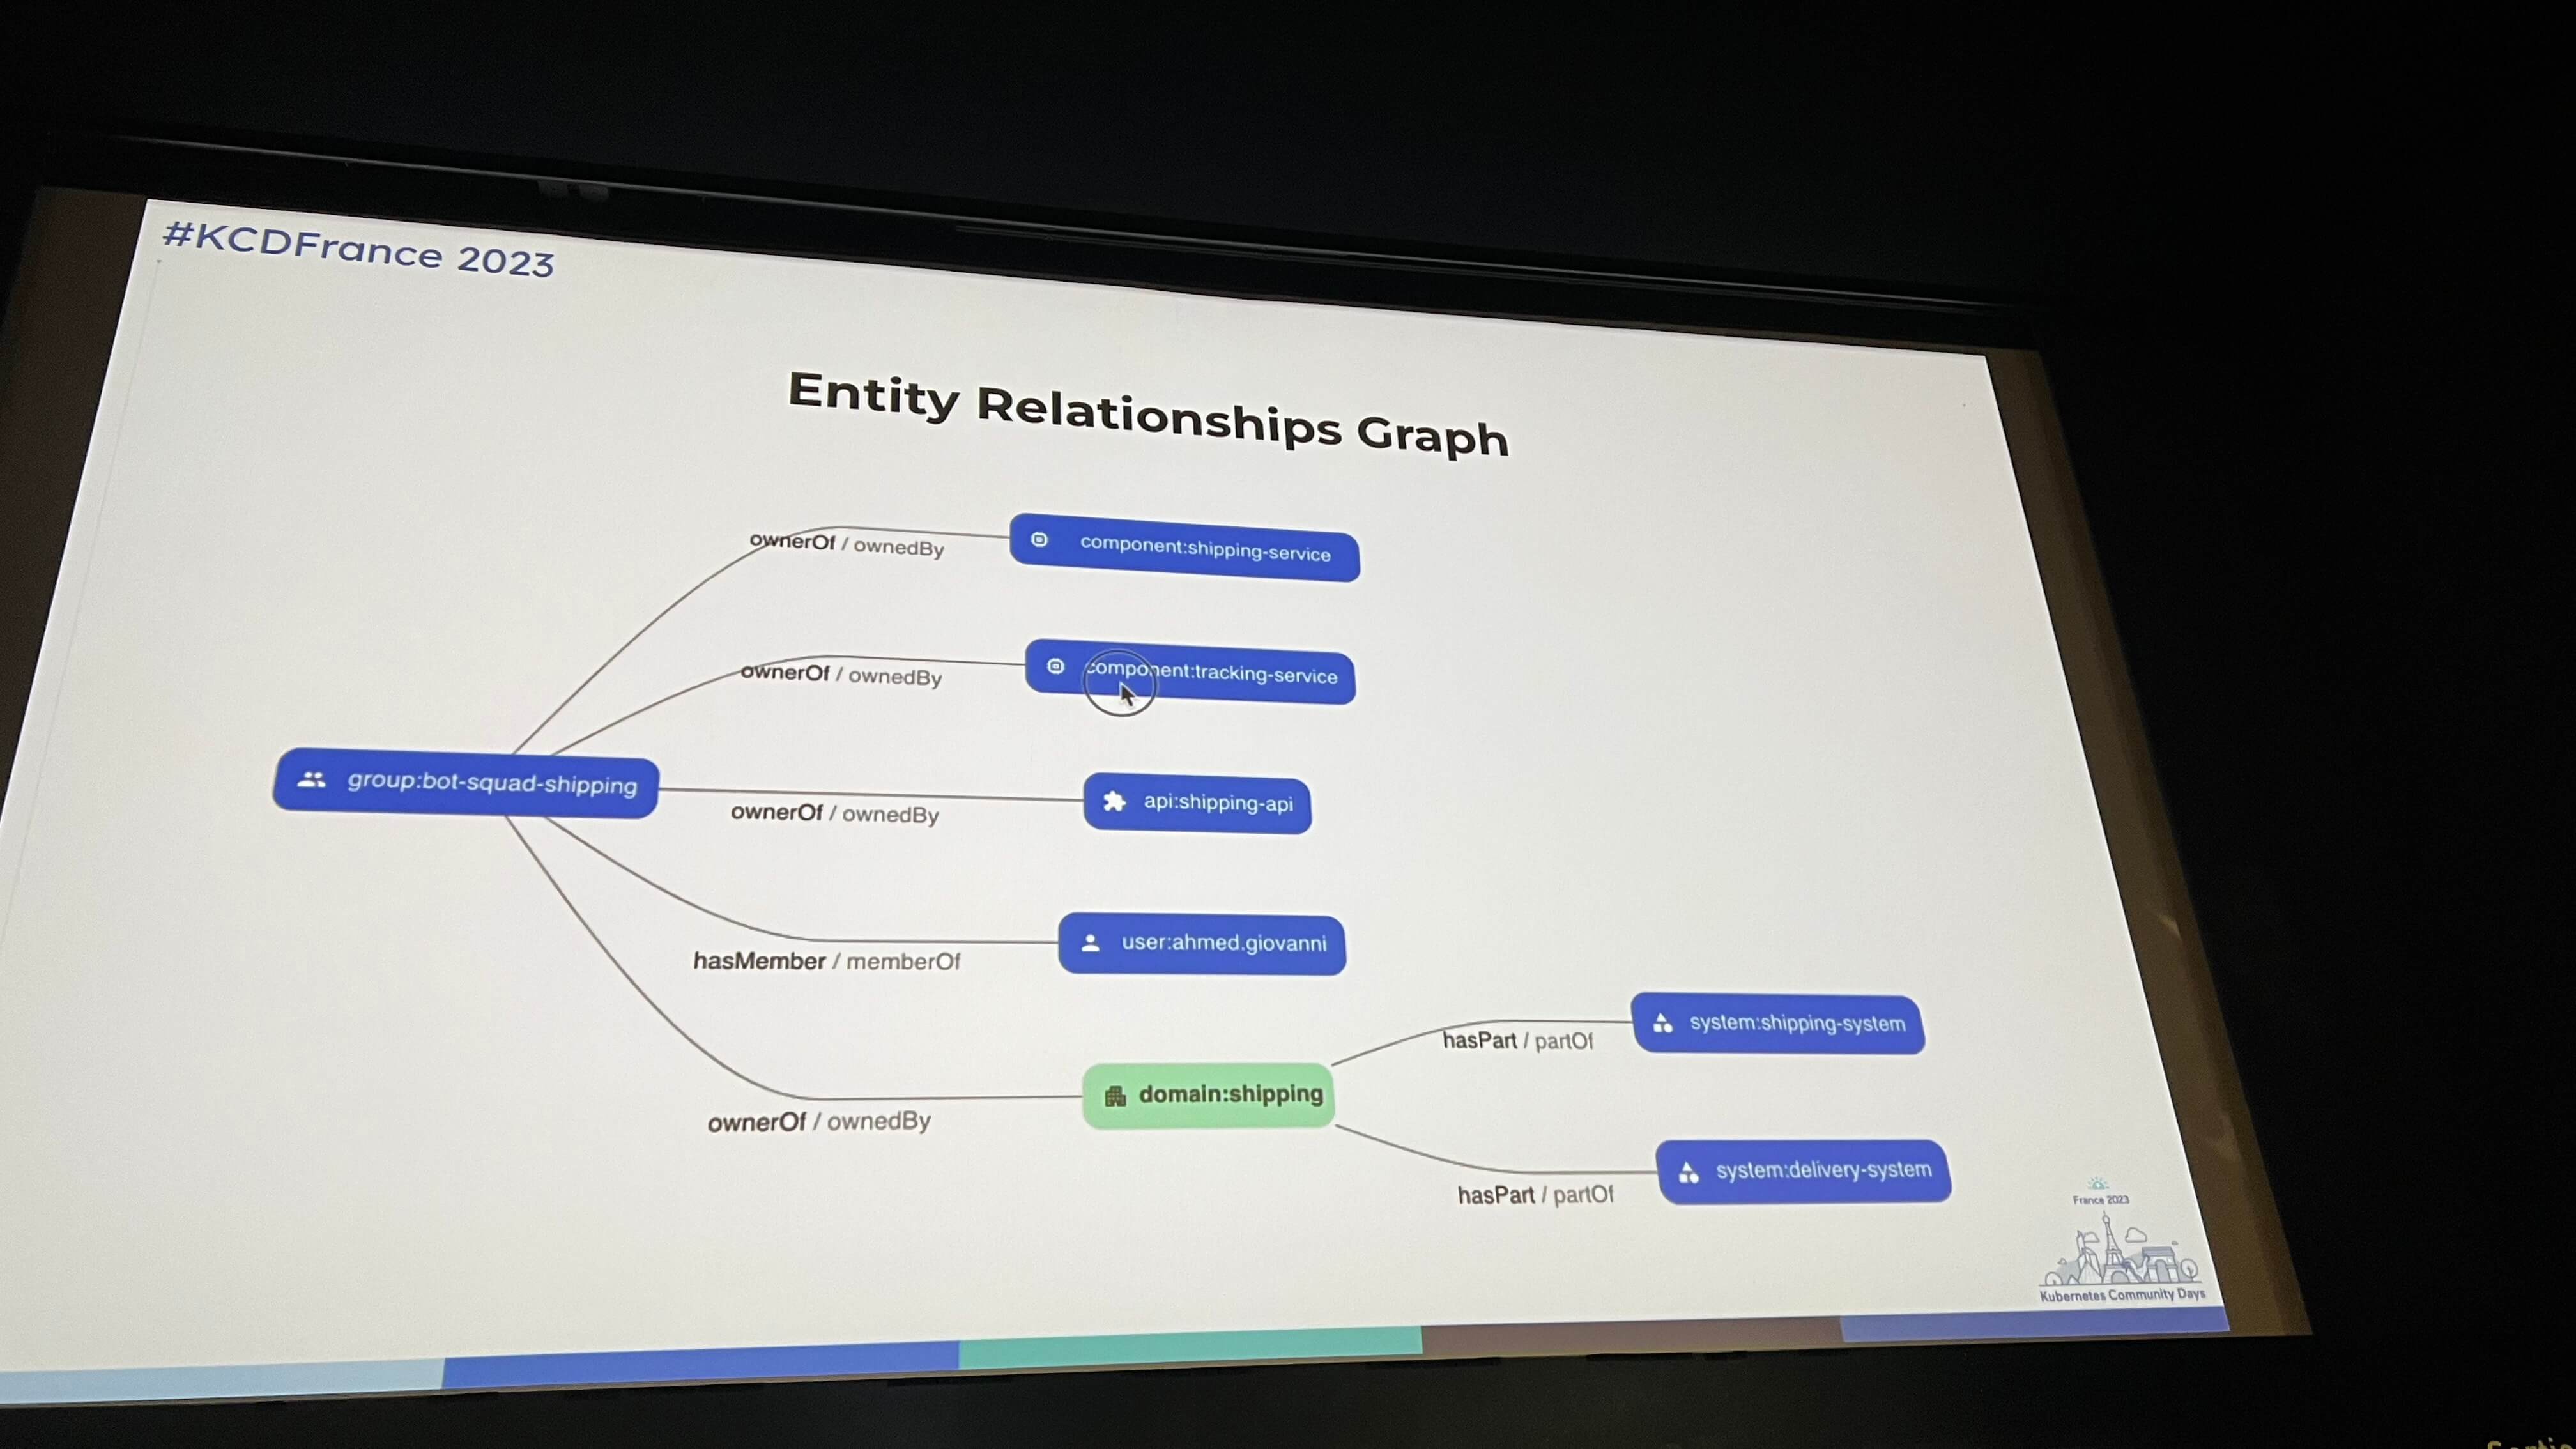 "Entity Relationships Graph"